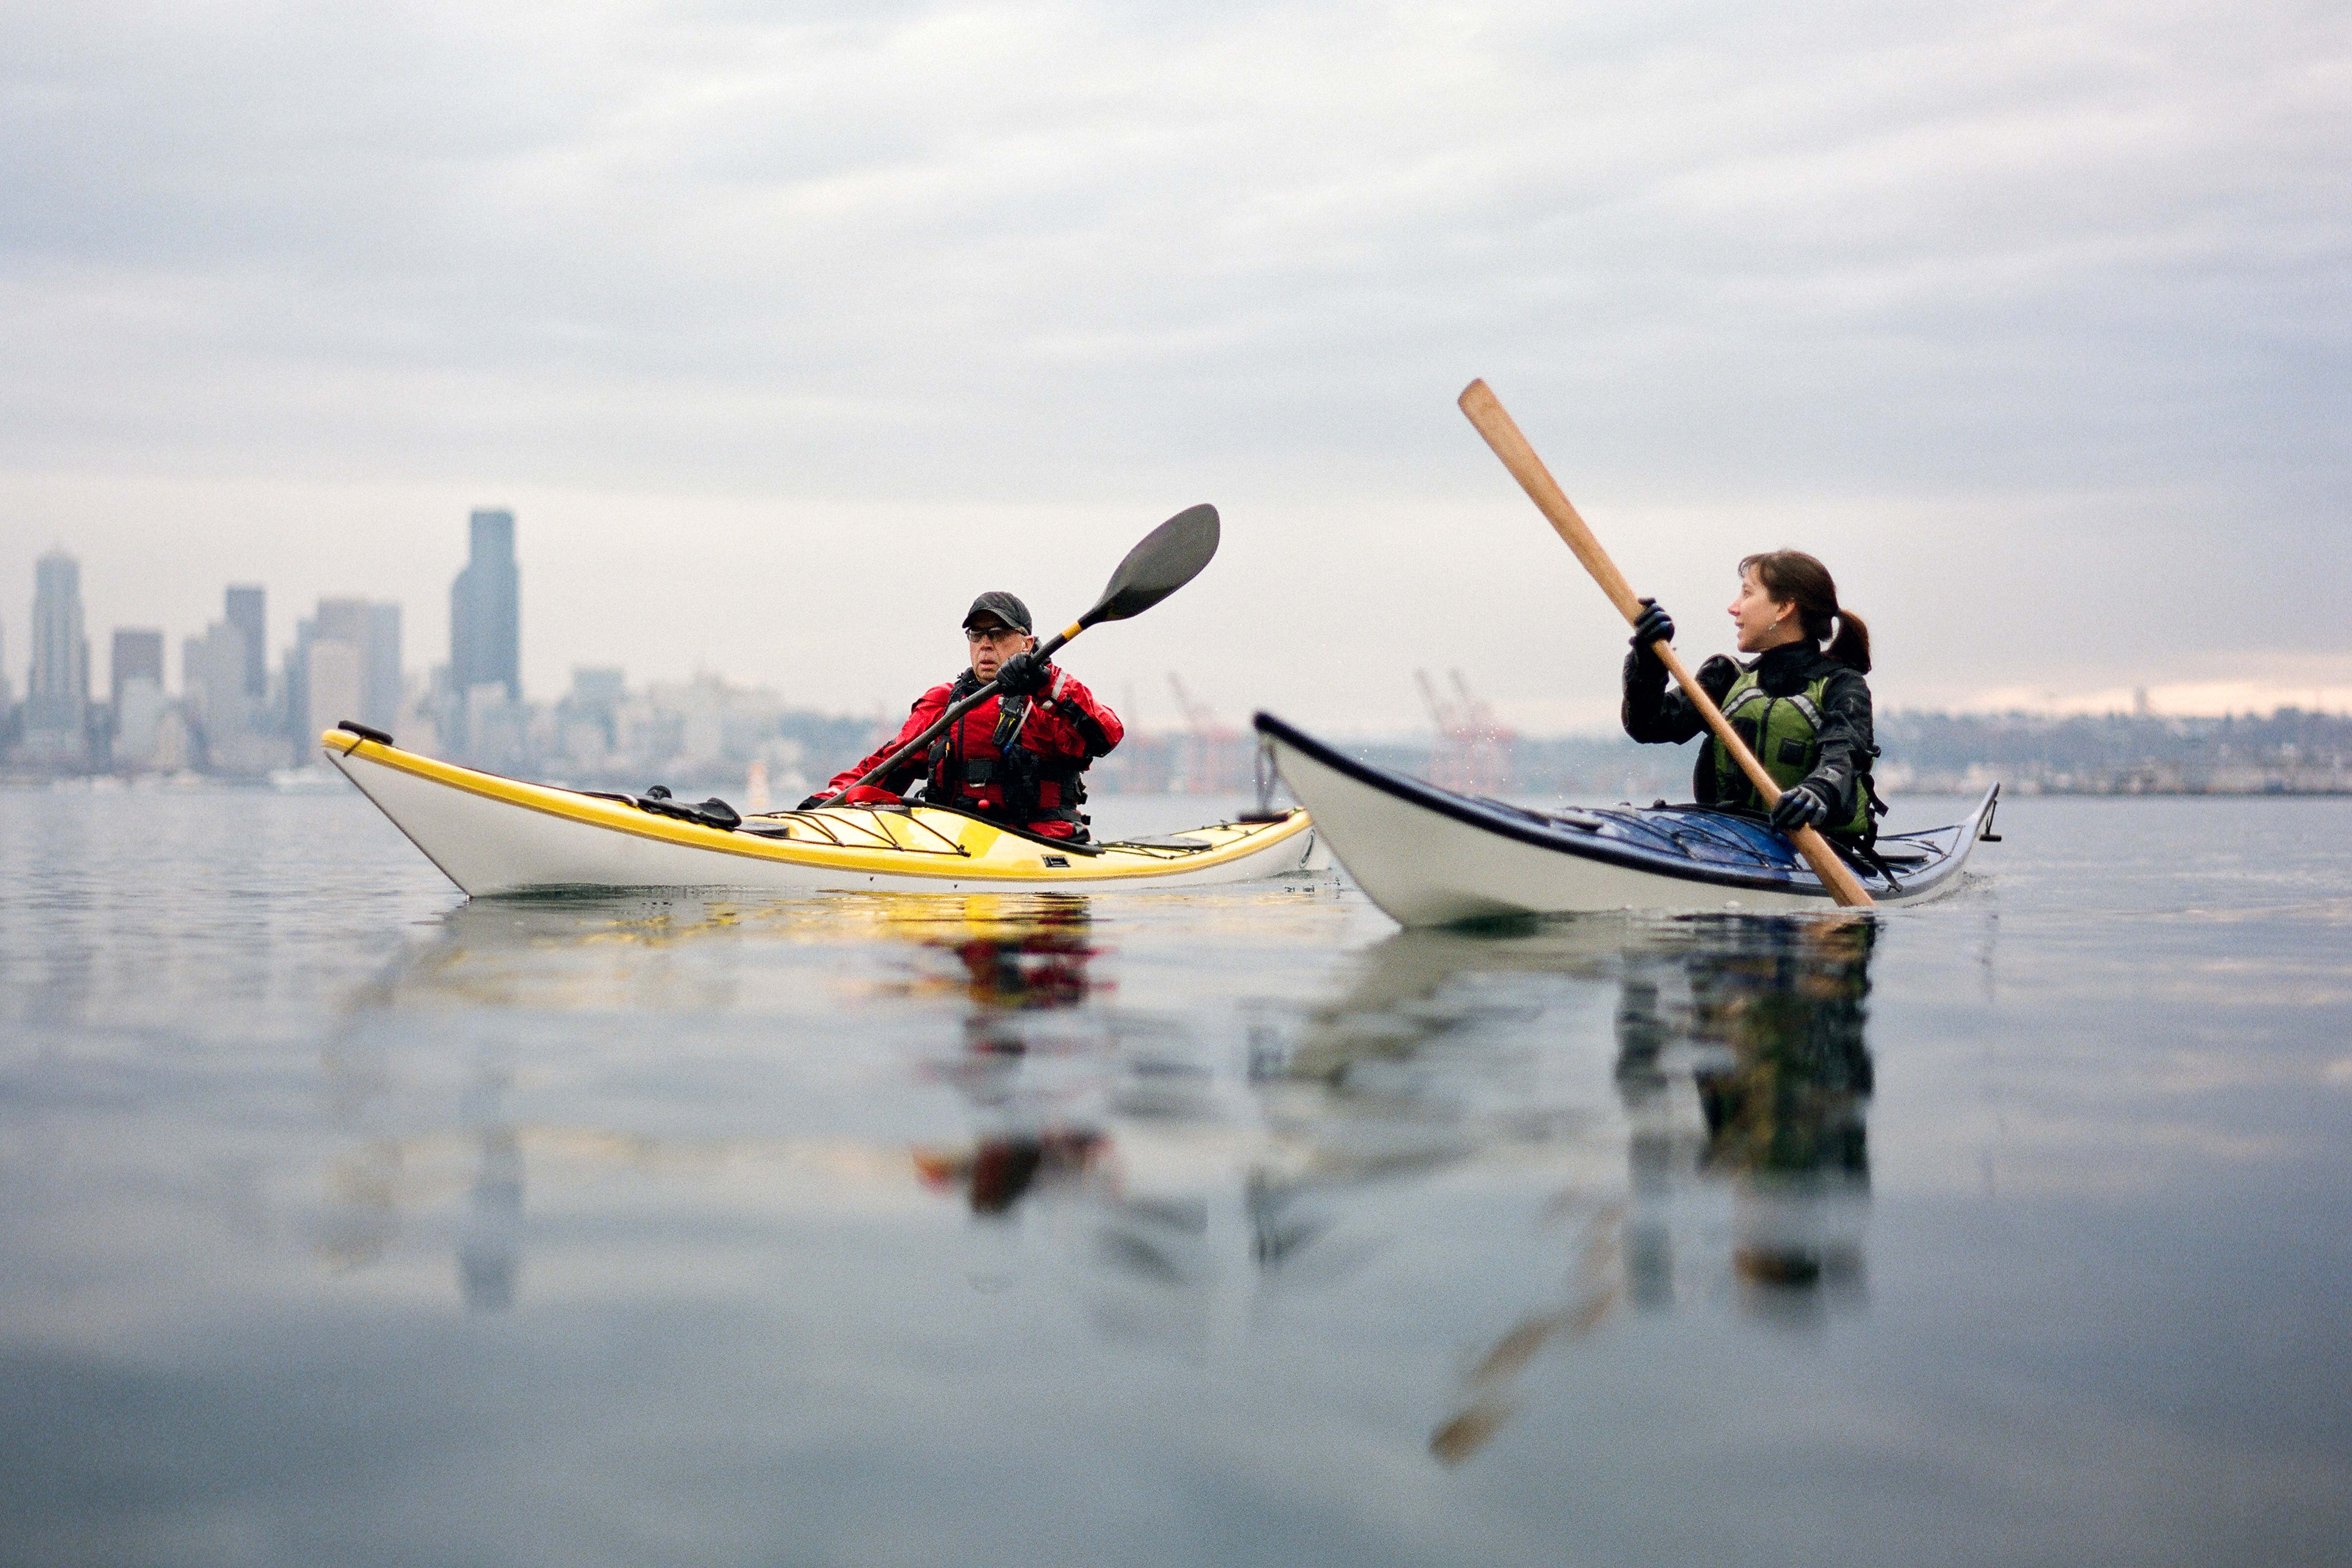 Kayaking is a great way to see Seattle’s waterways. Image by Kirk Mastin / Aurora / Getty